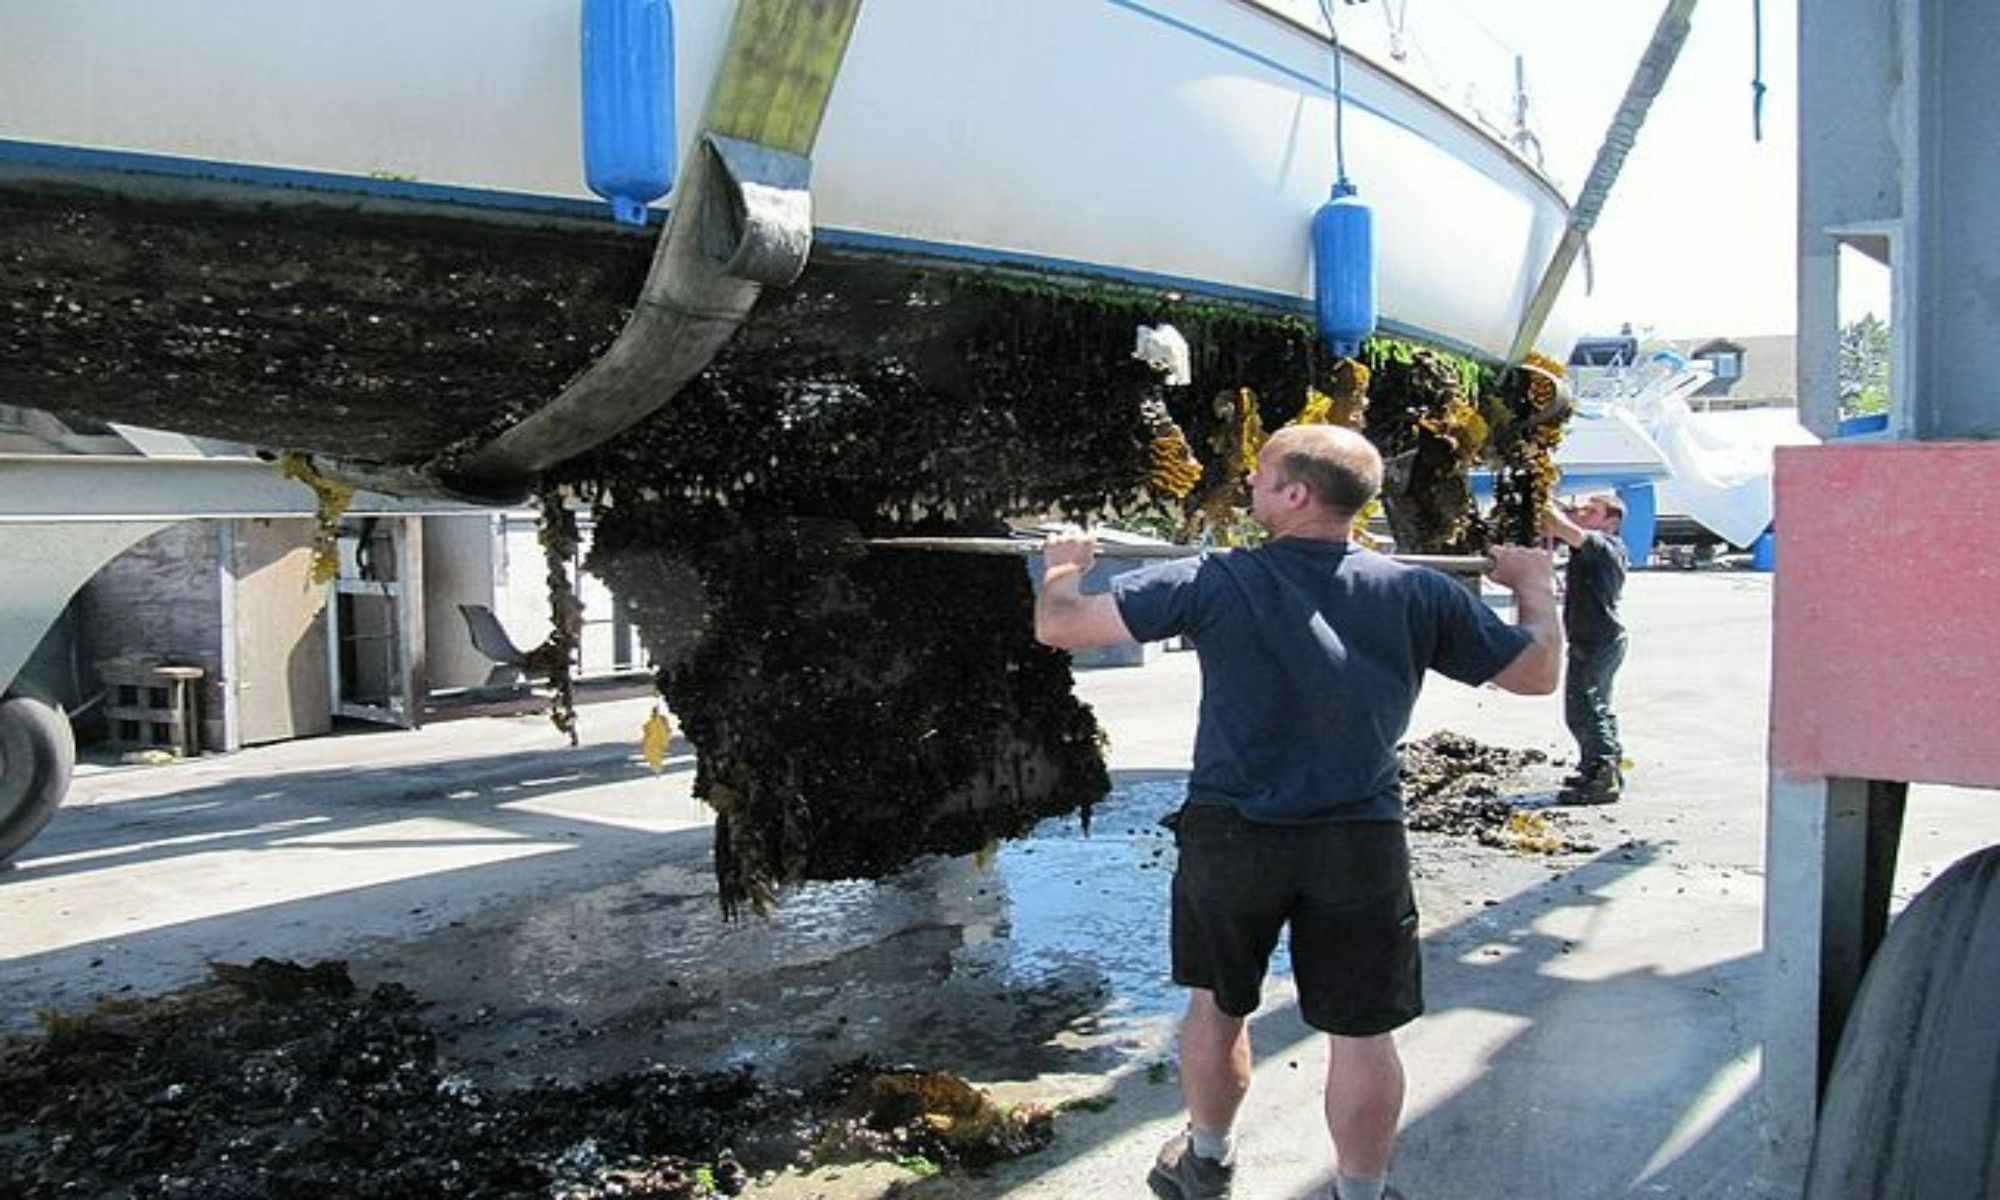 The Best Way to Clean a Boat